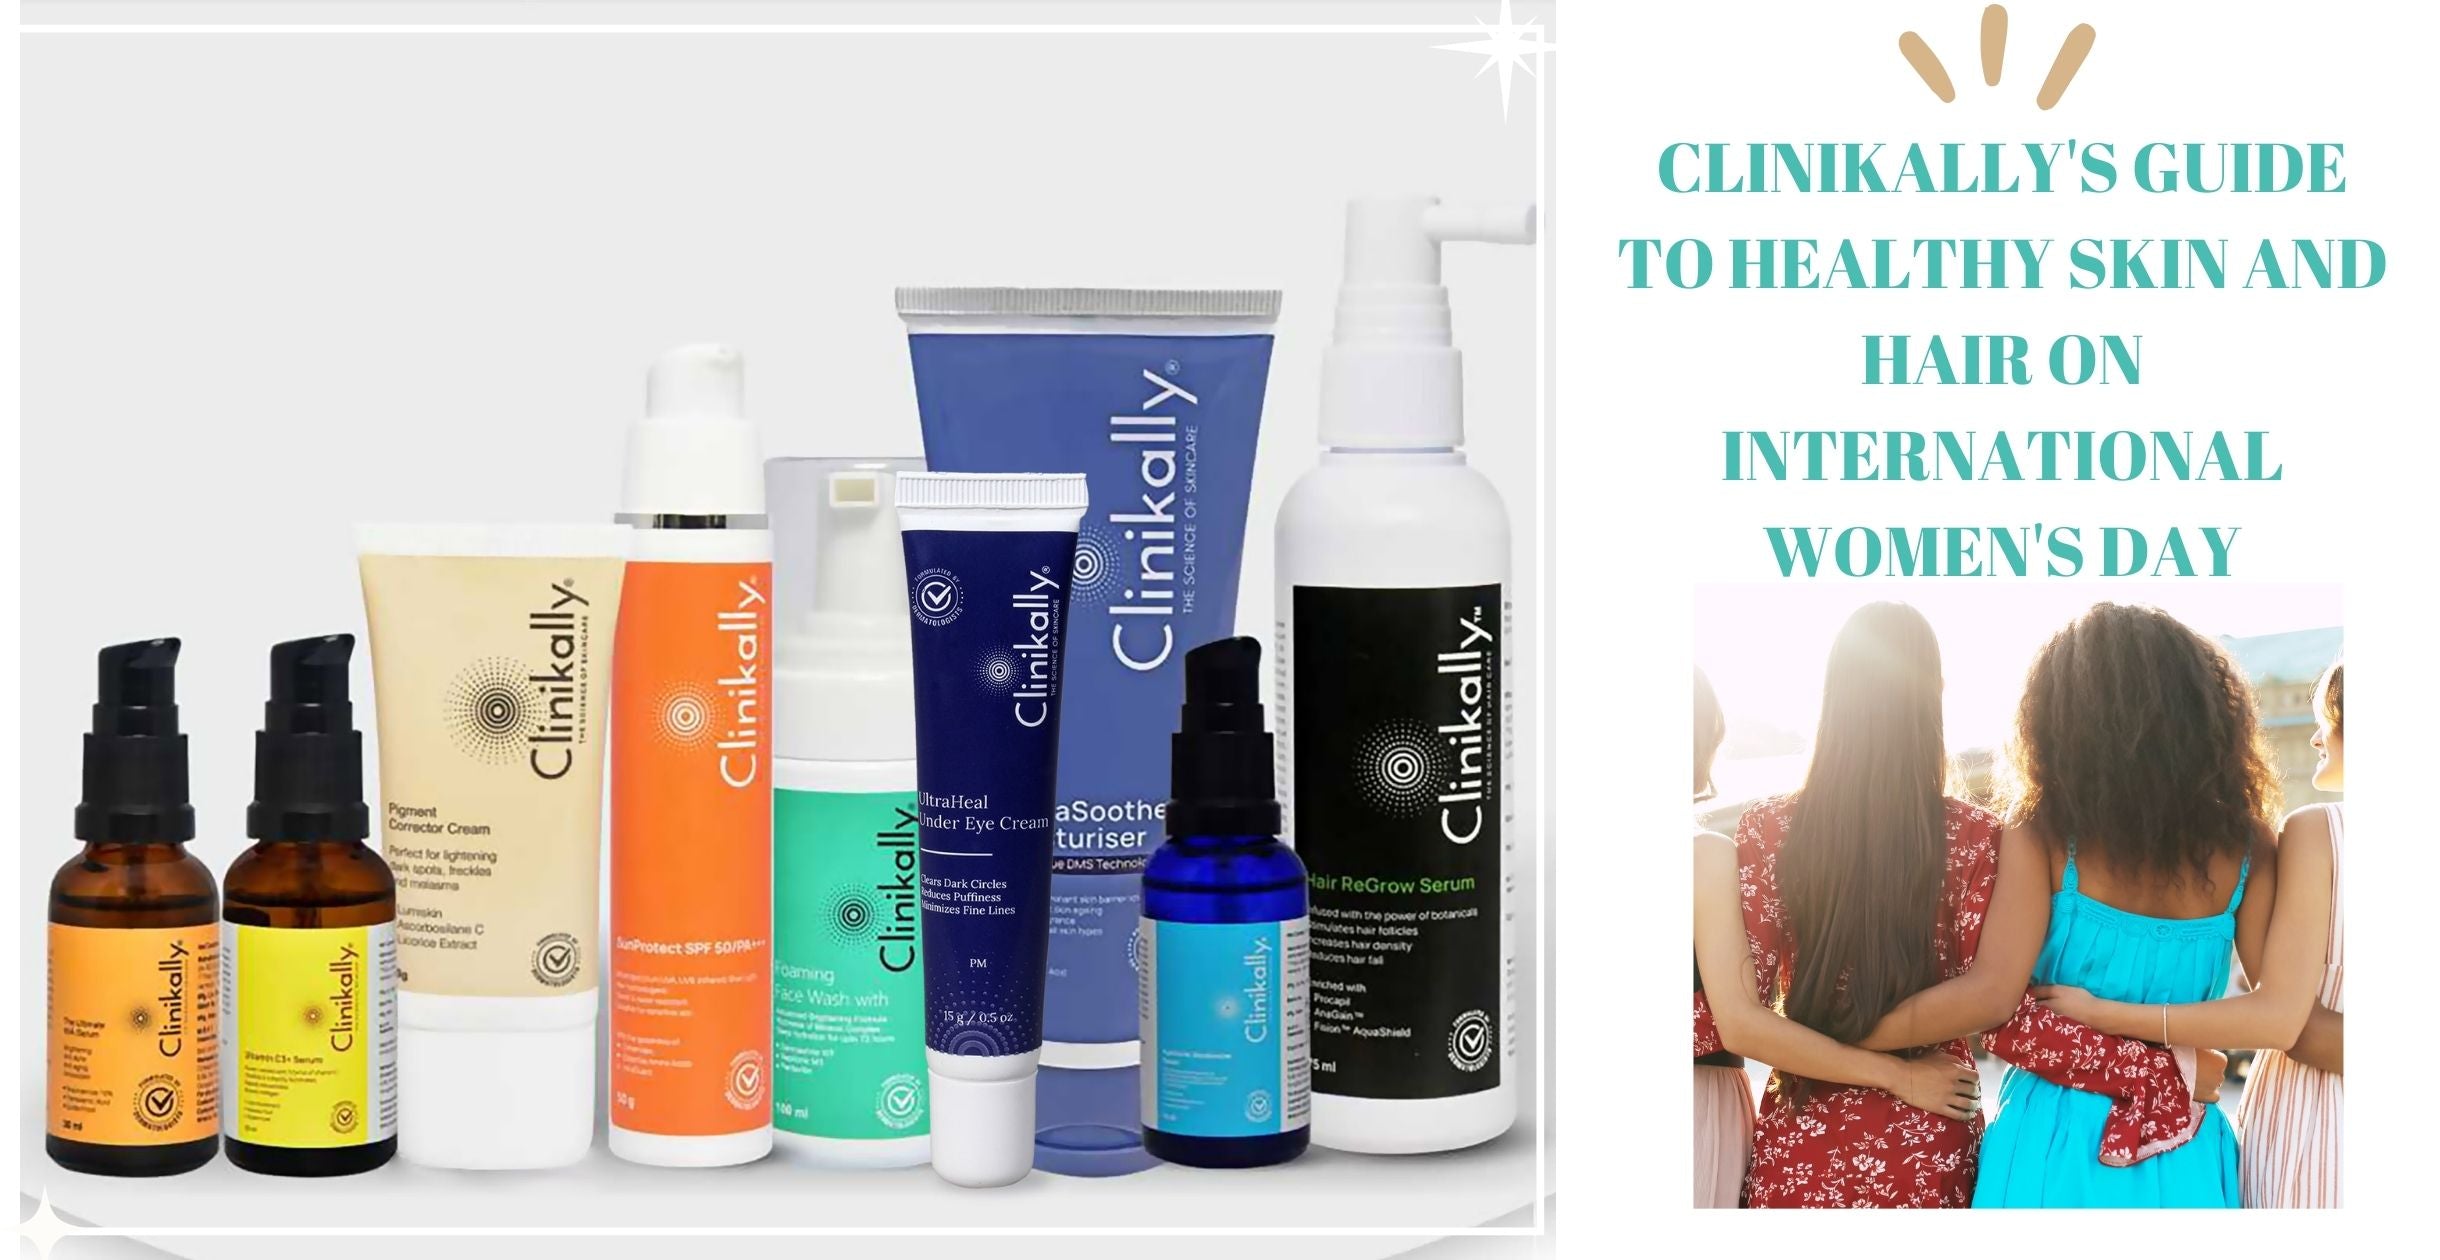 Clinikally's Guide to Healthy Skin and Hair on International Women's Day